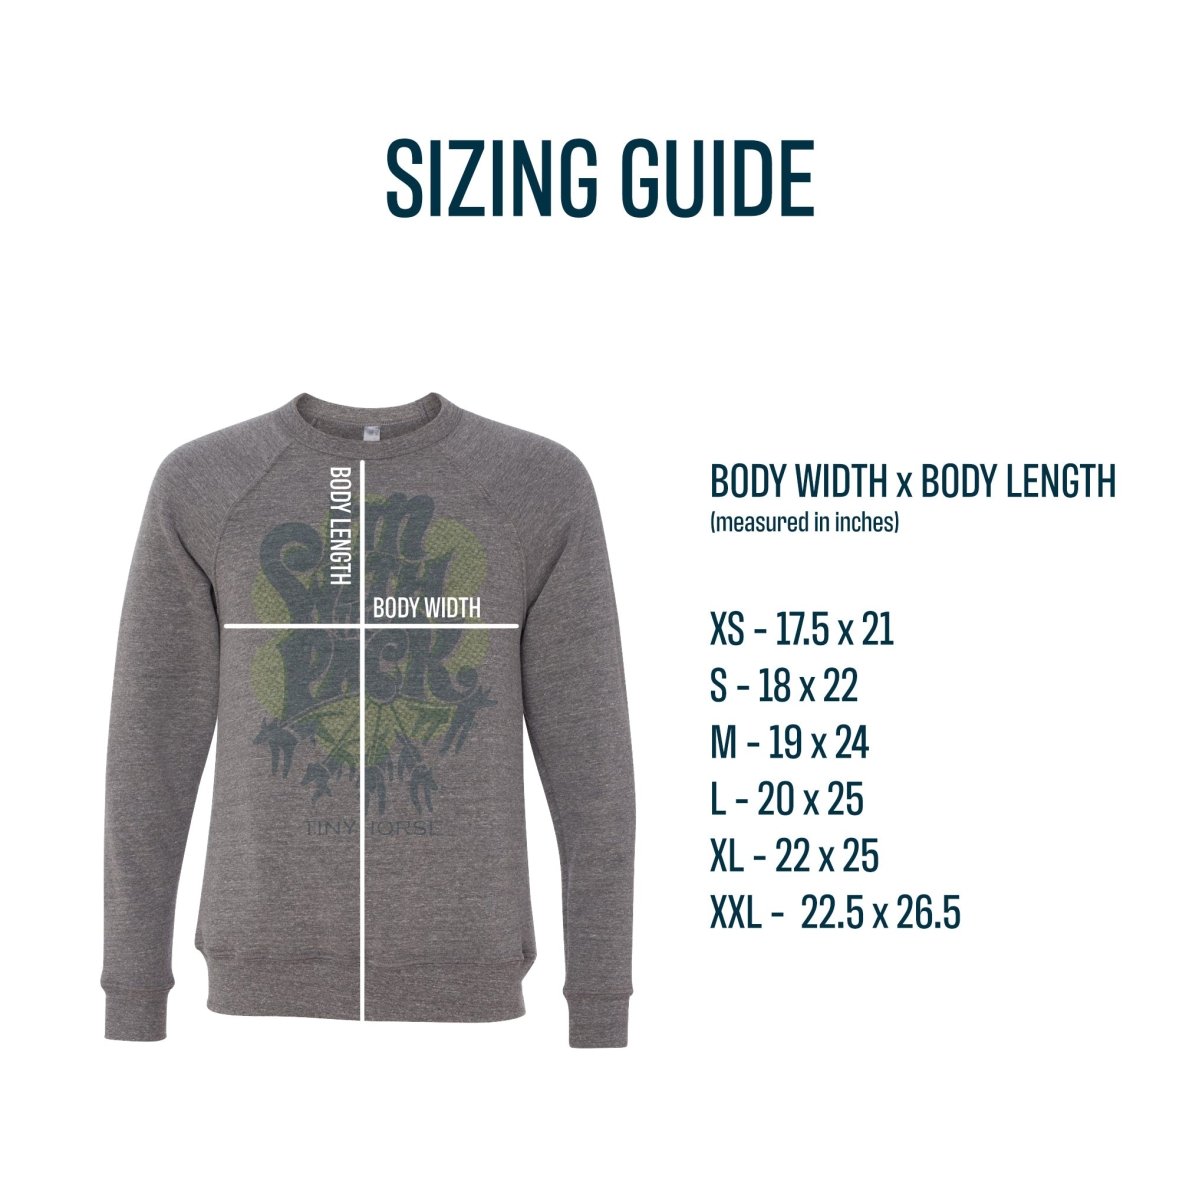 Sizing guide for the fleece-lined "I'm with the Pack" Sweatshirt